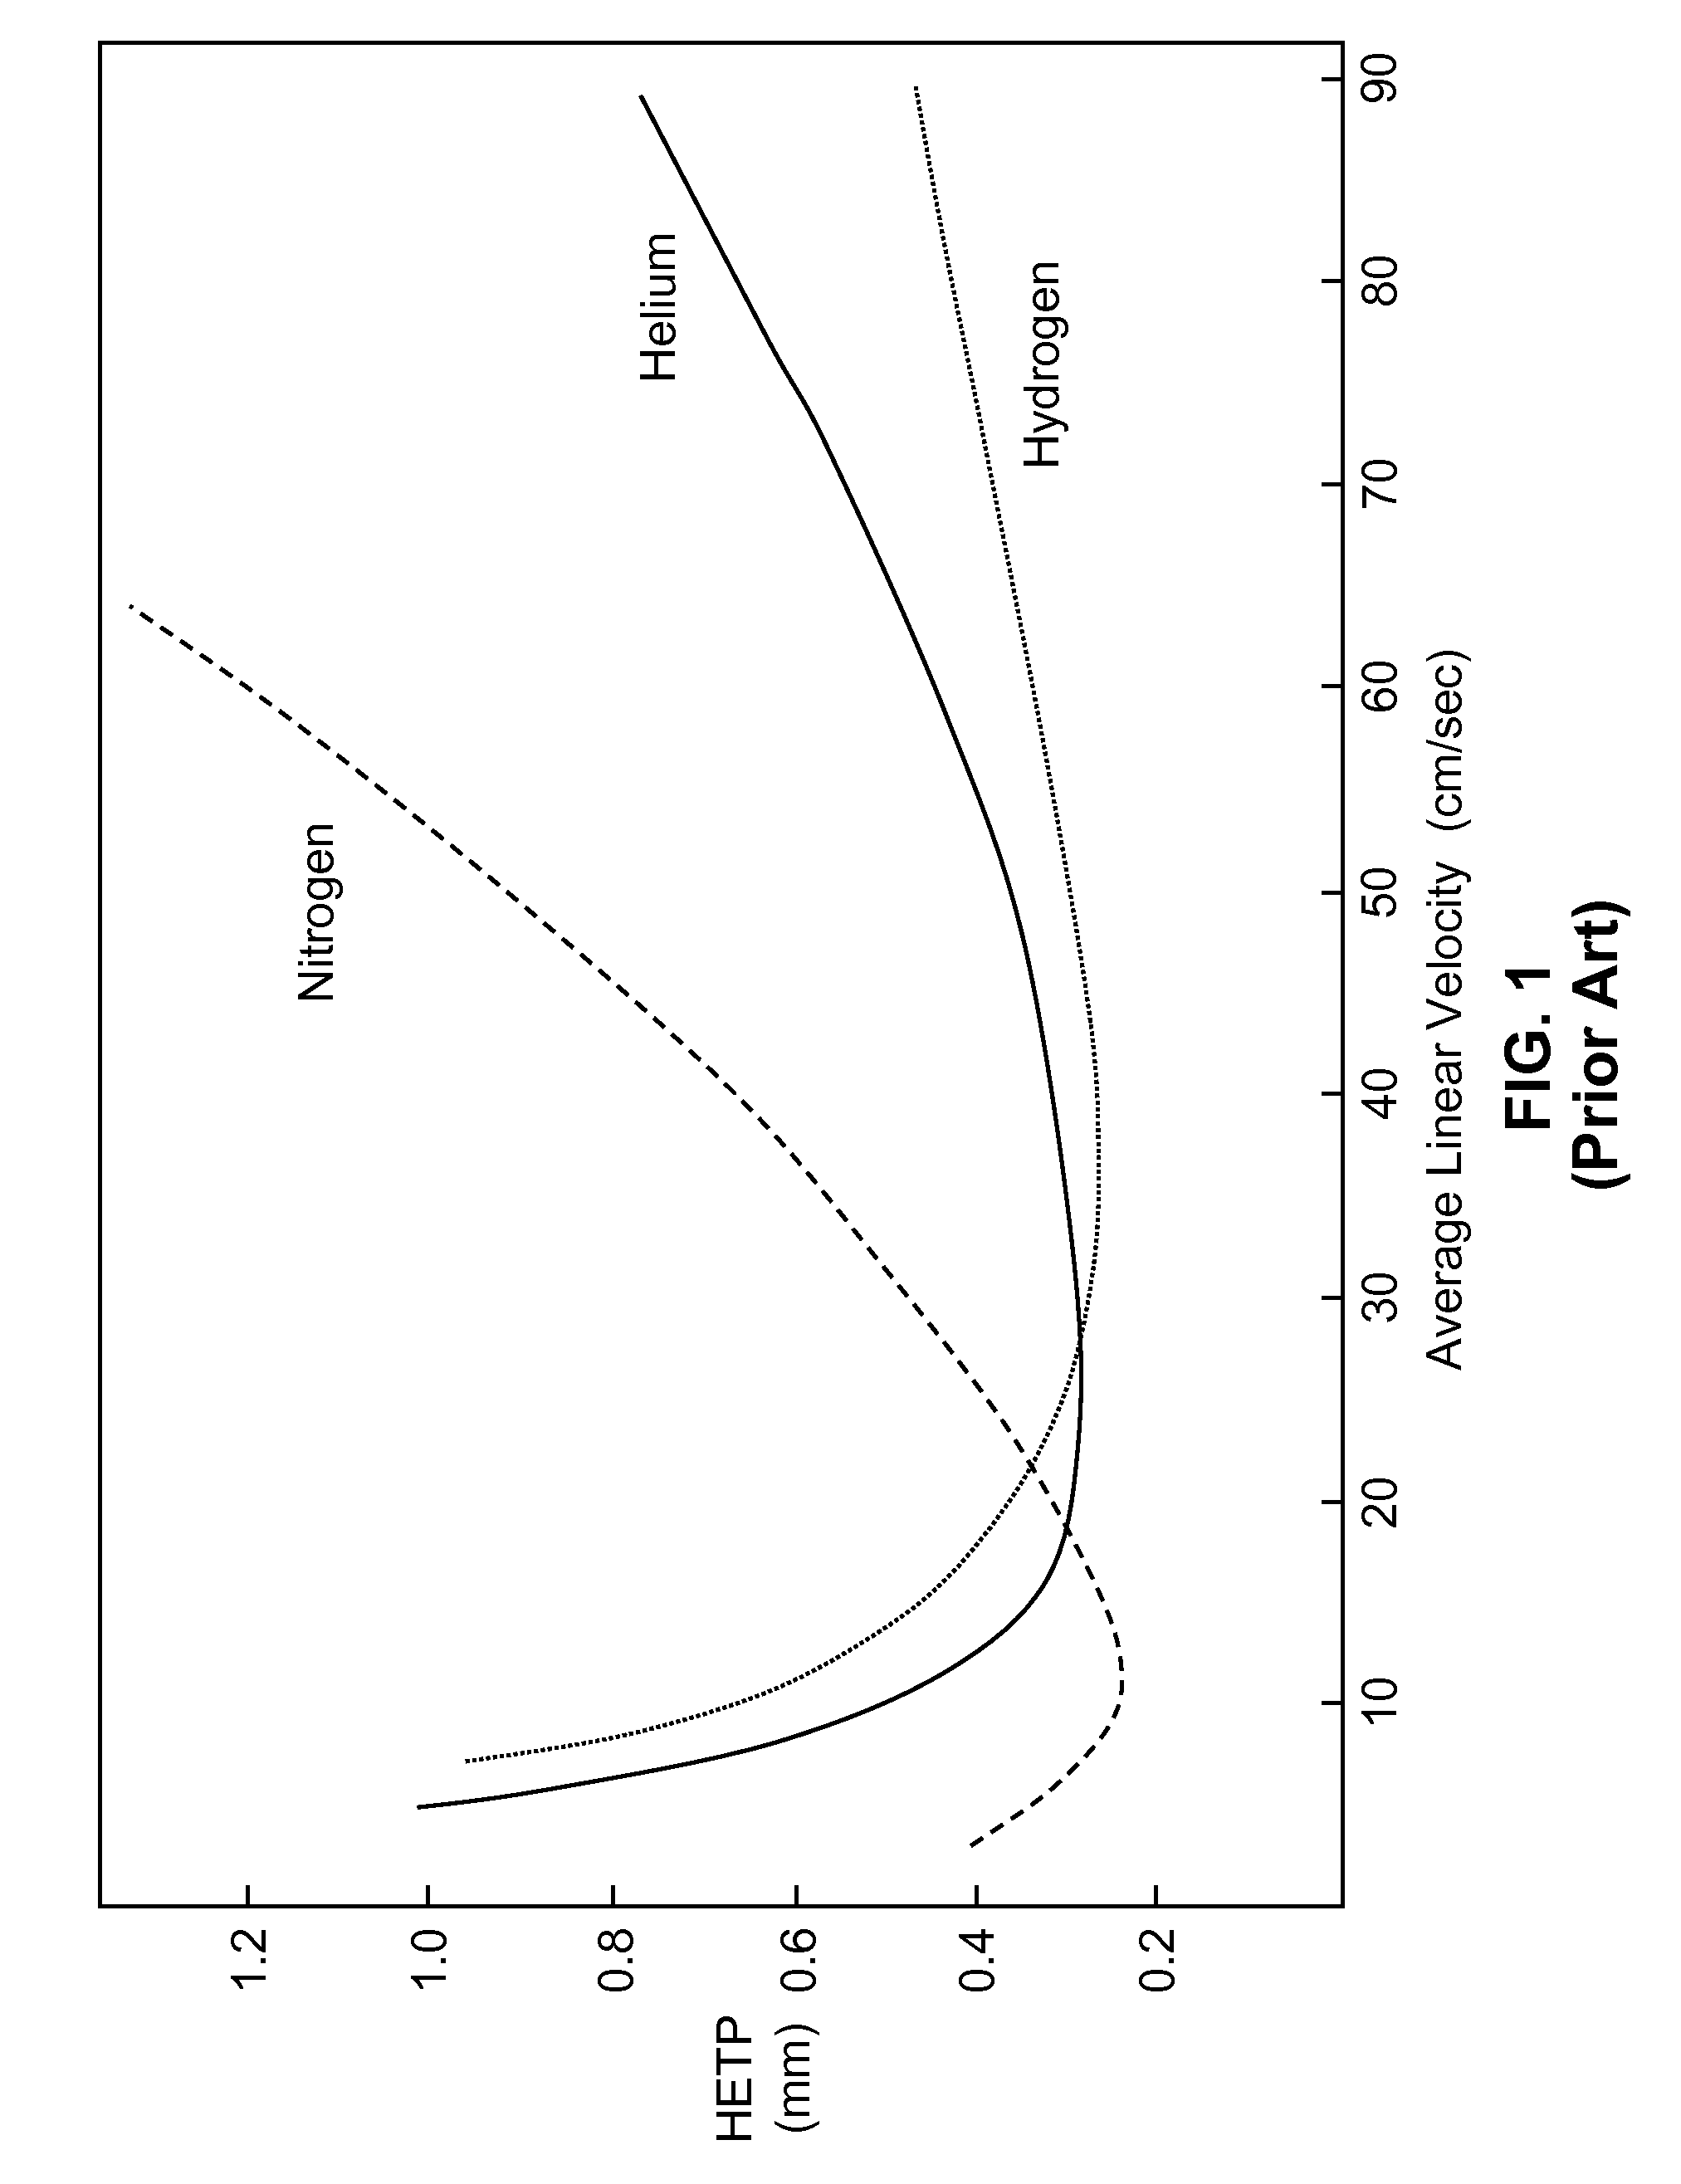 Gas Chromatograph System Employing Hydrogen Carrier Gas